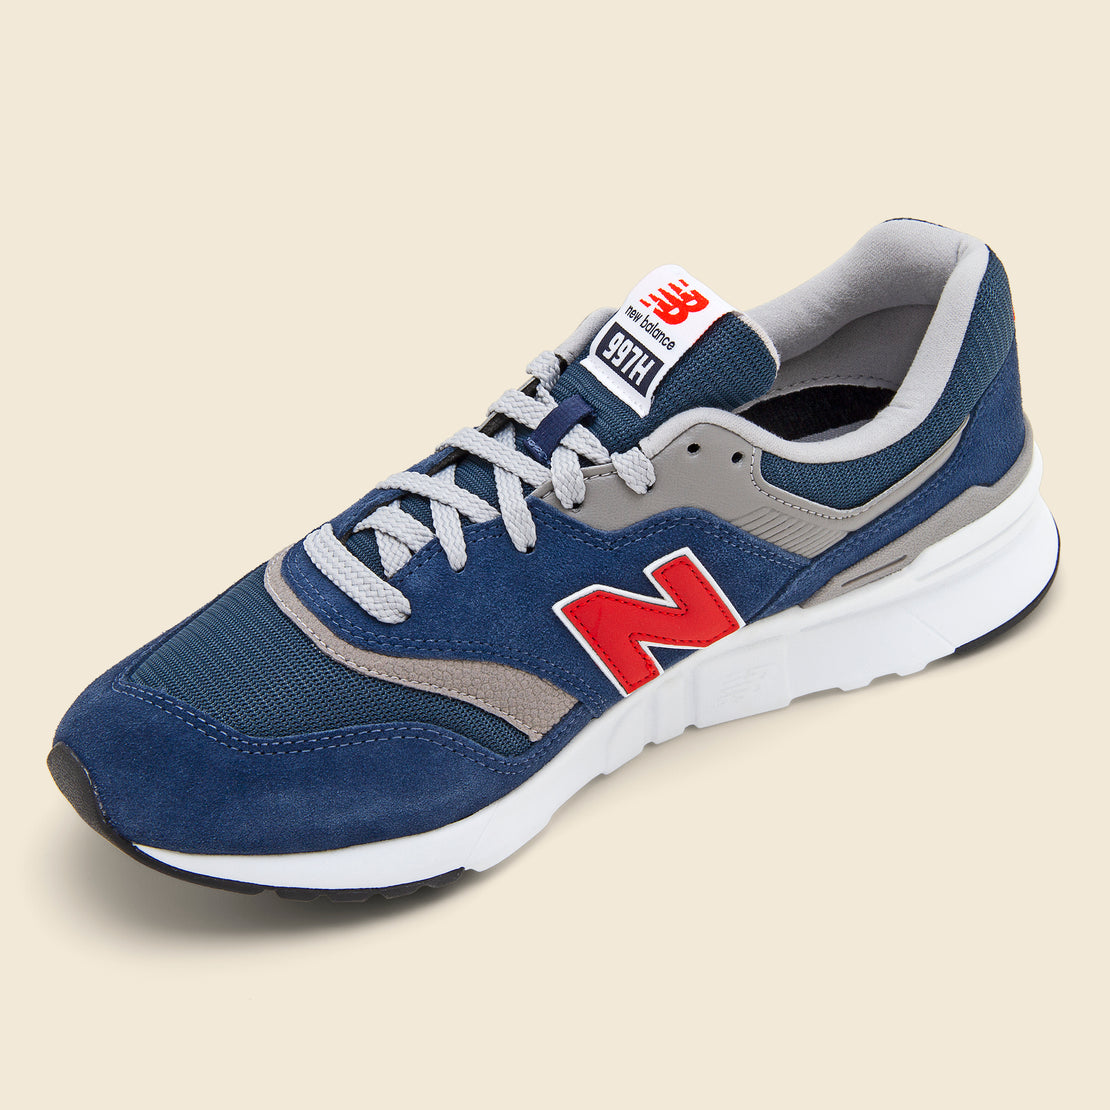 997H Sneaker - Natural Indigo - New Balance - STAG Provisions - Shoes - Athletic